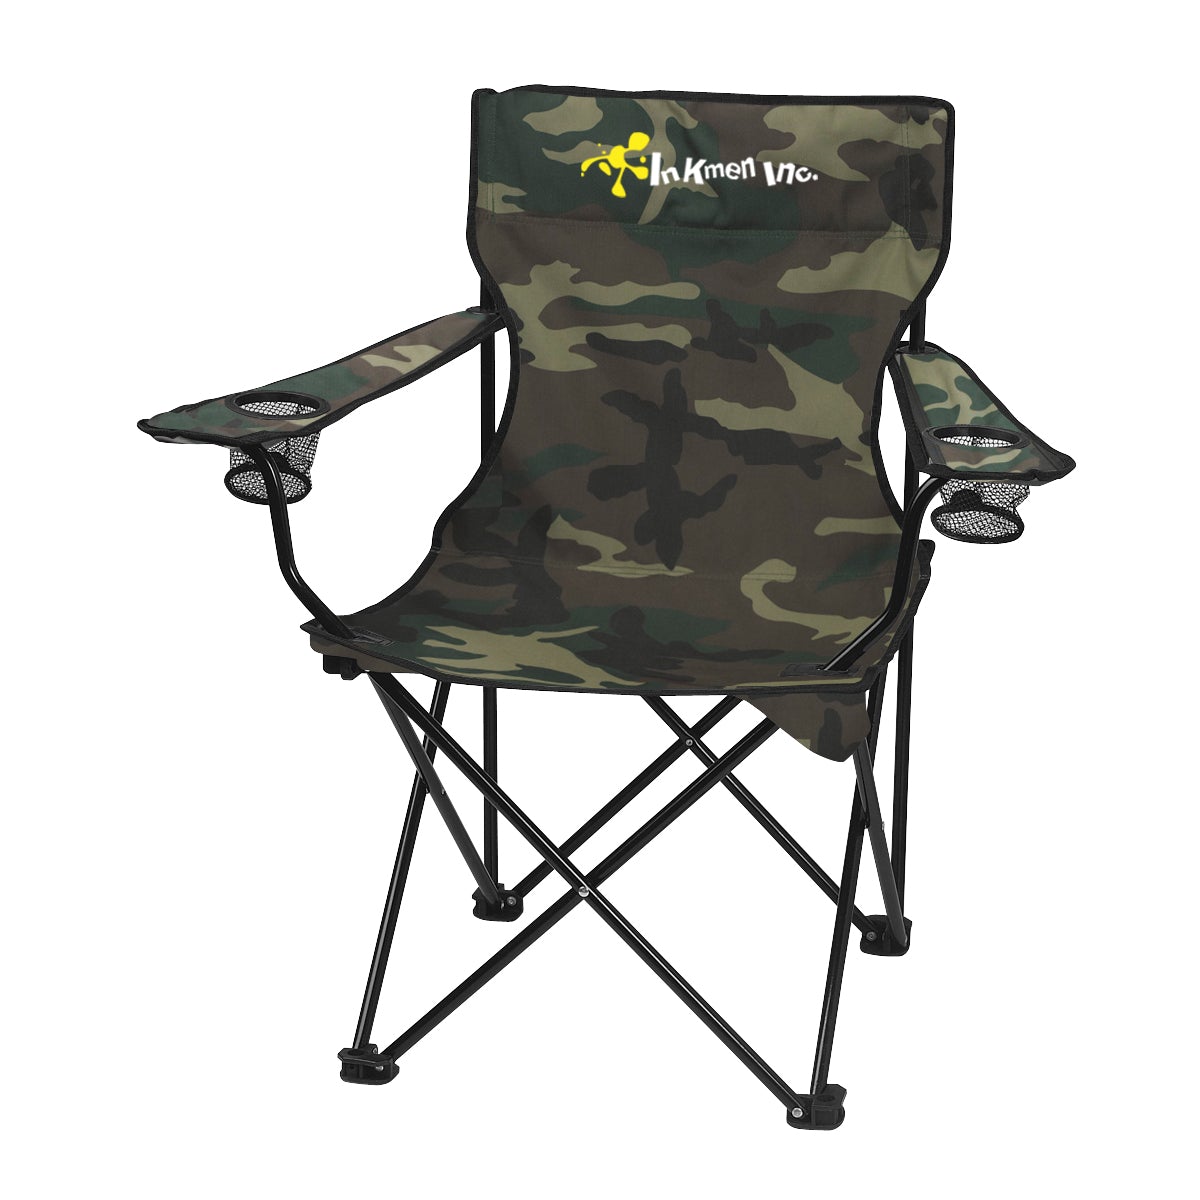 Folding Chair with Carrying Bag Chairs Hit Promo Camouflage Multi Color 